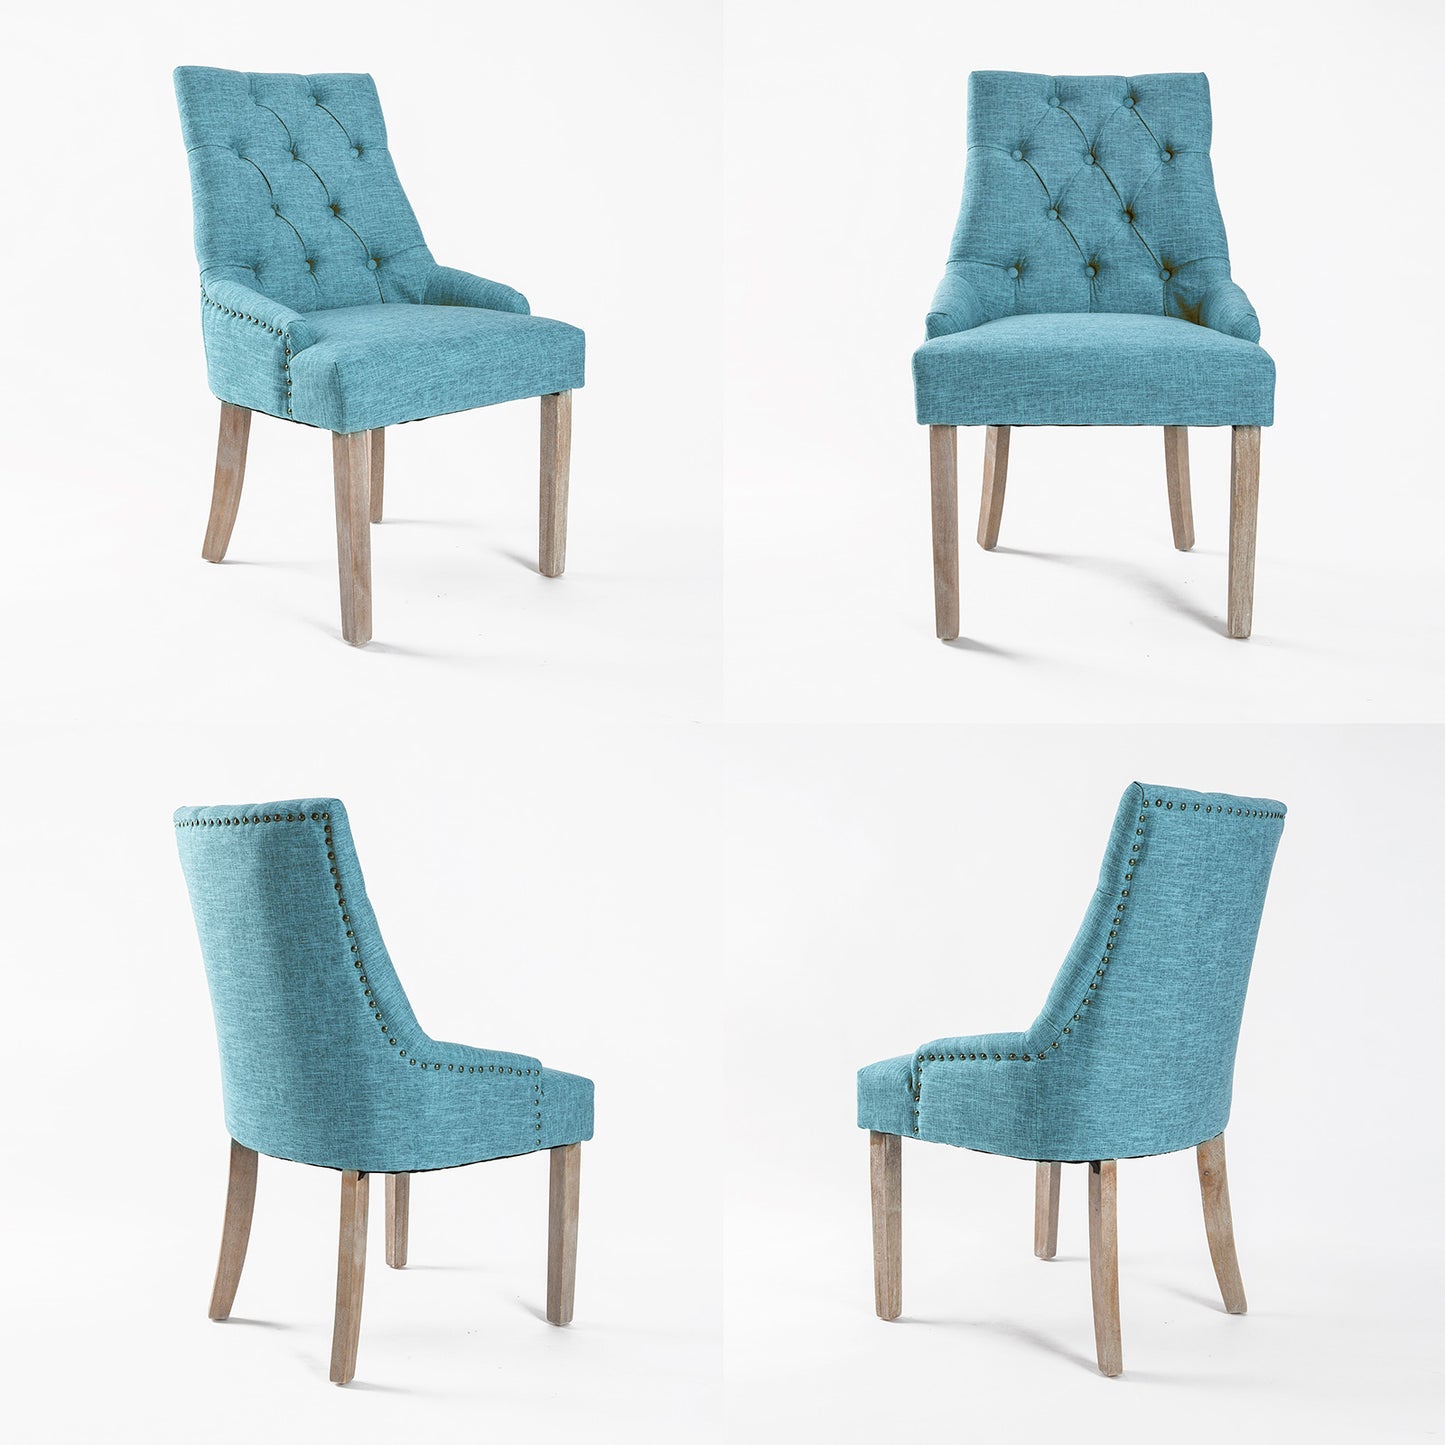 La Bella 4 Set French Provincial Dining Chair - Blue